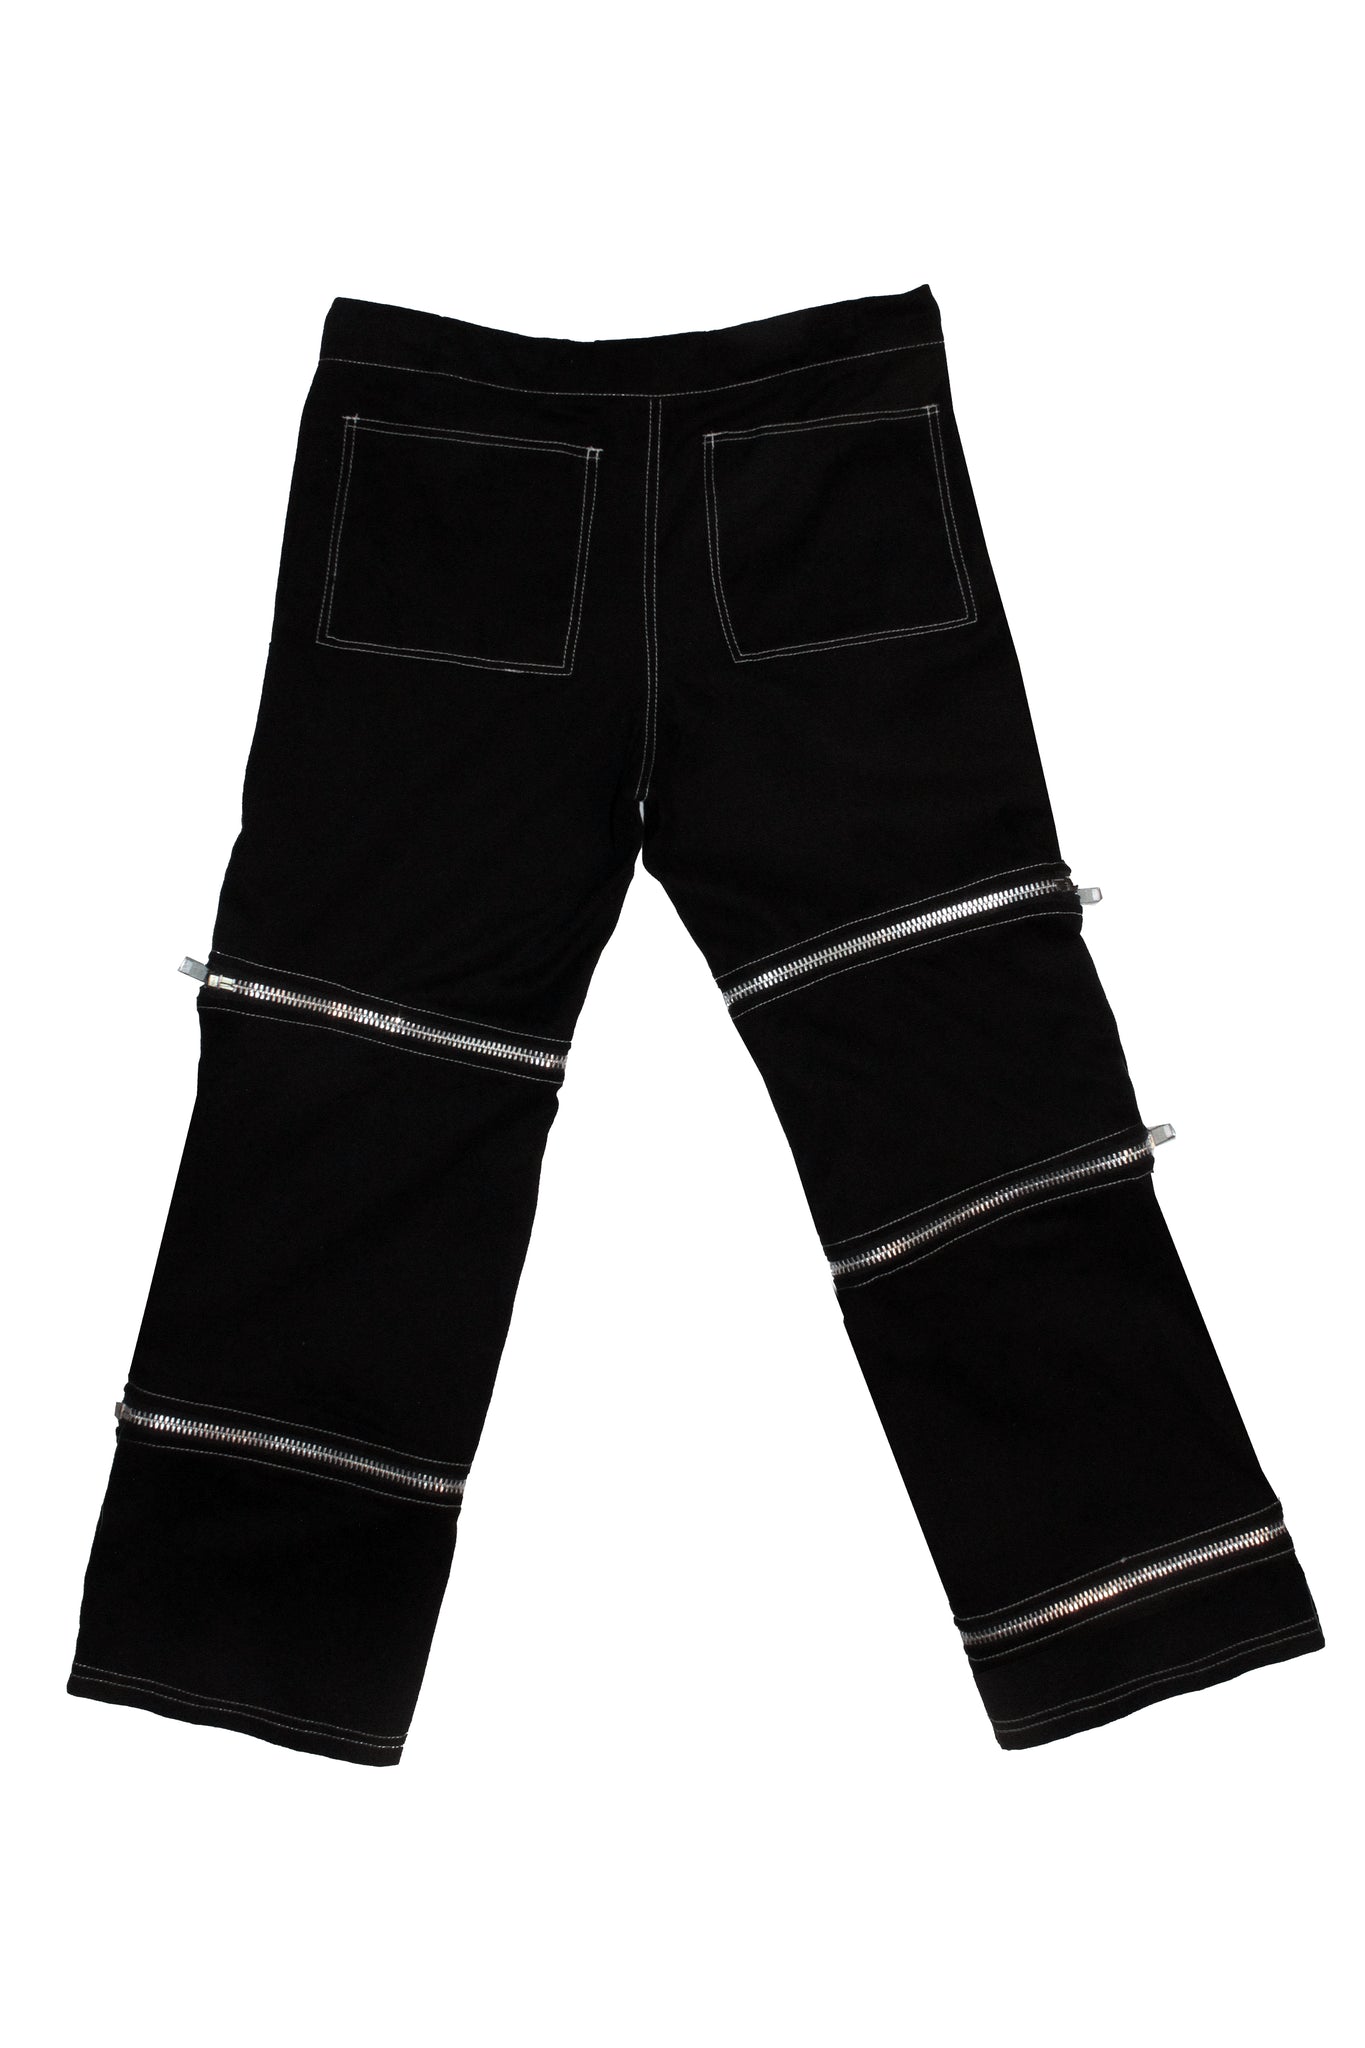 Black Zipper Trousers by The World Is Your Oyster on Sale